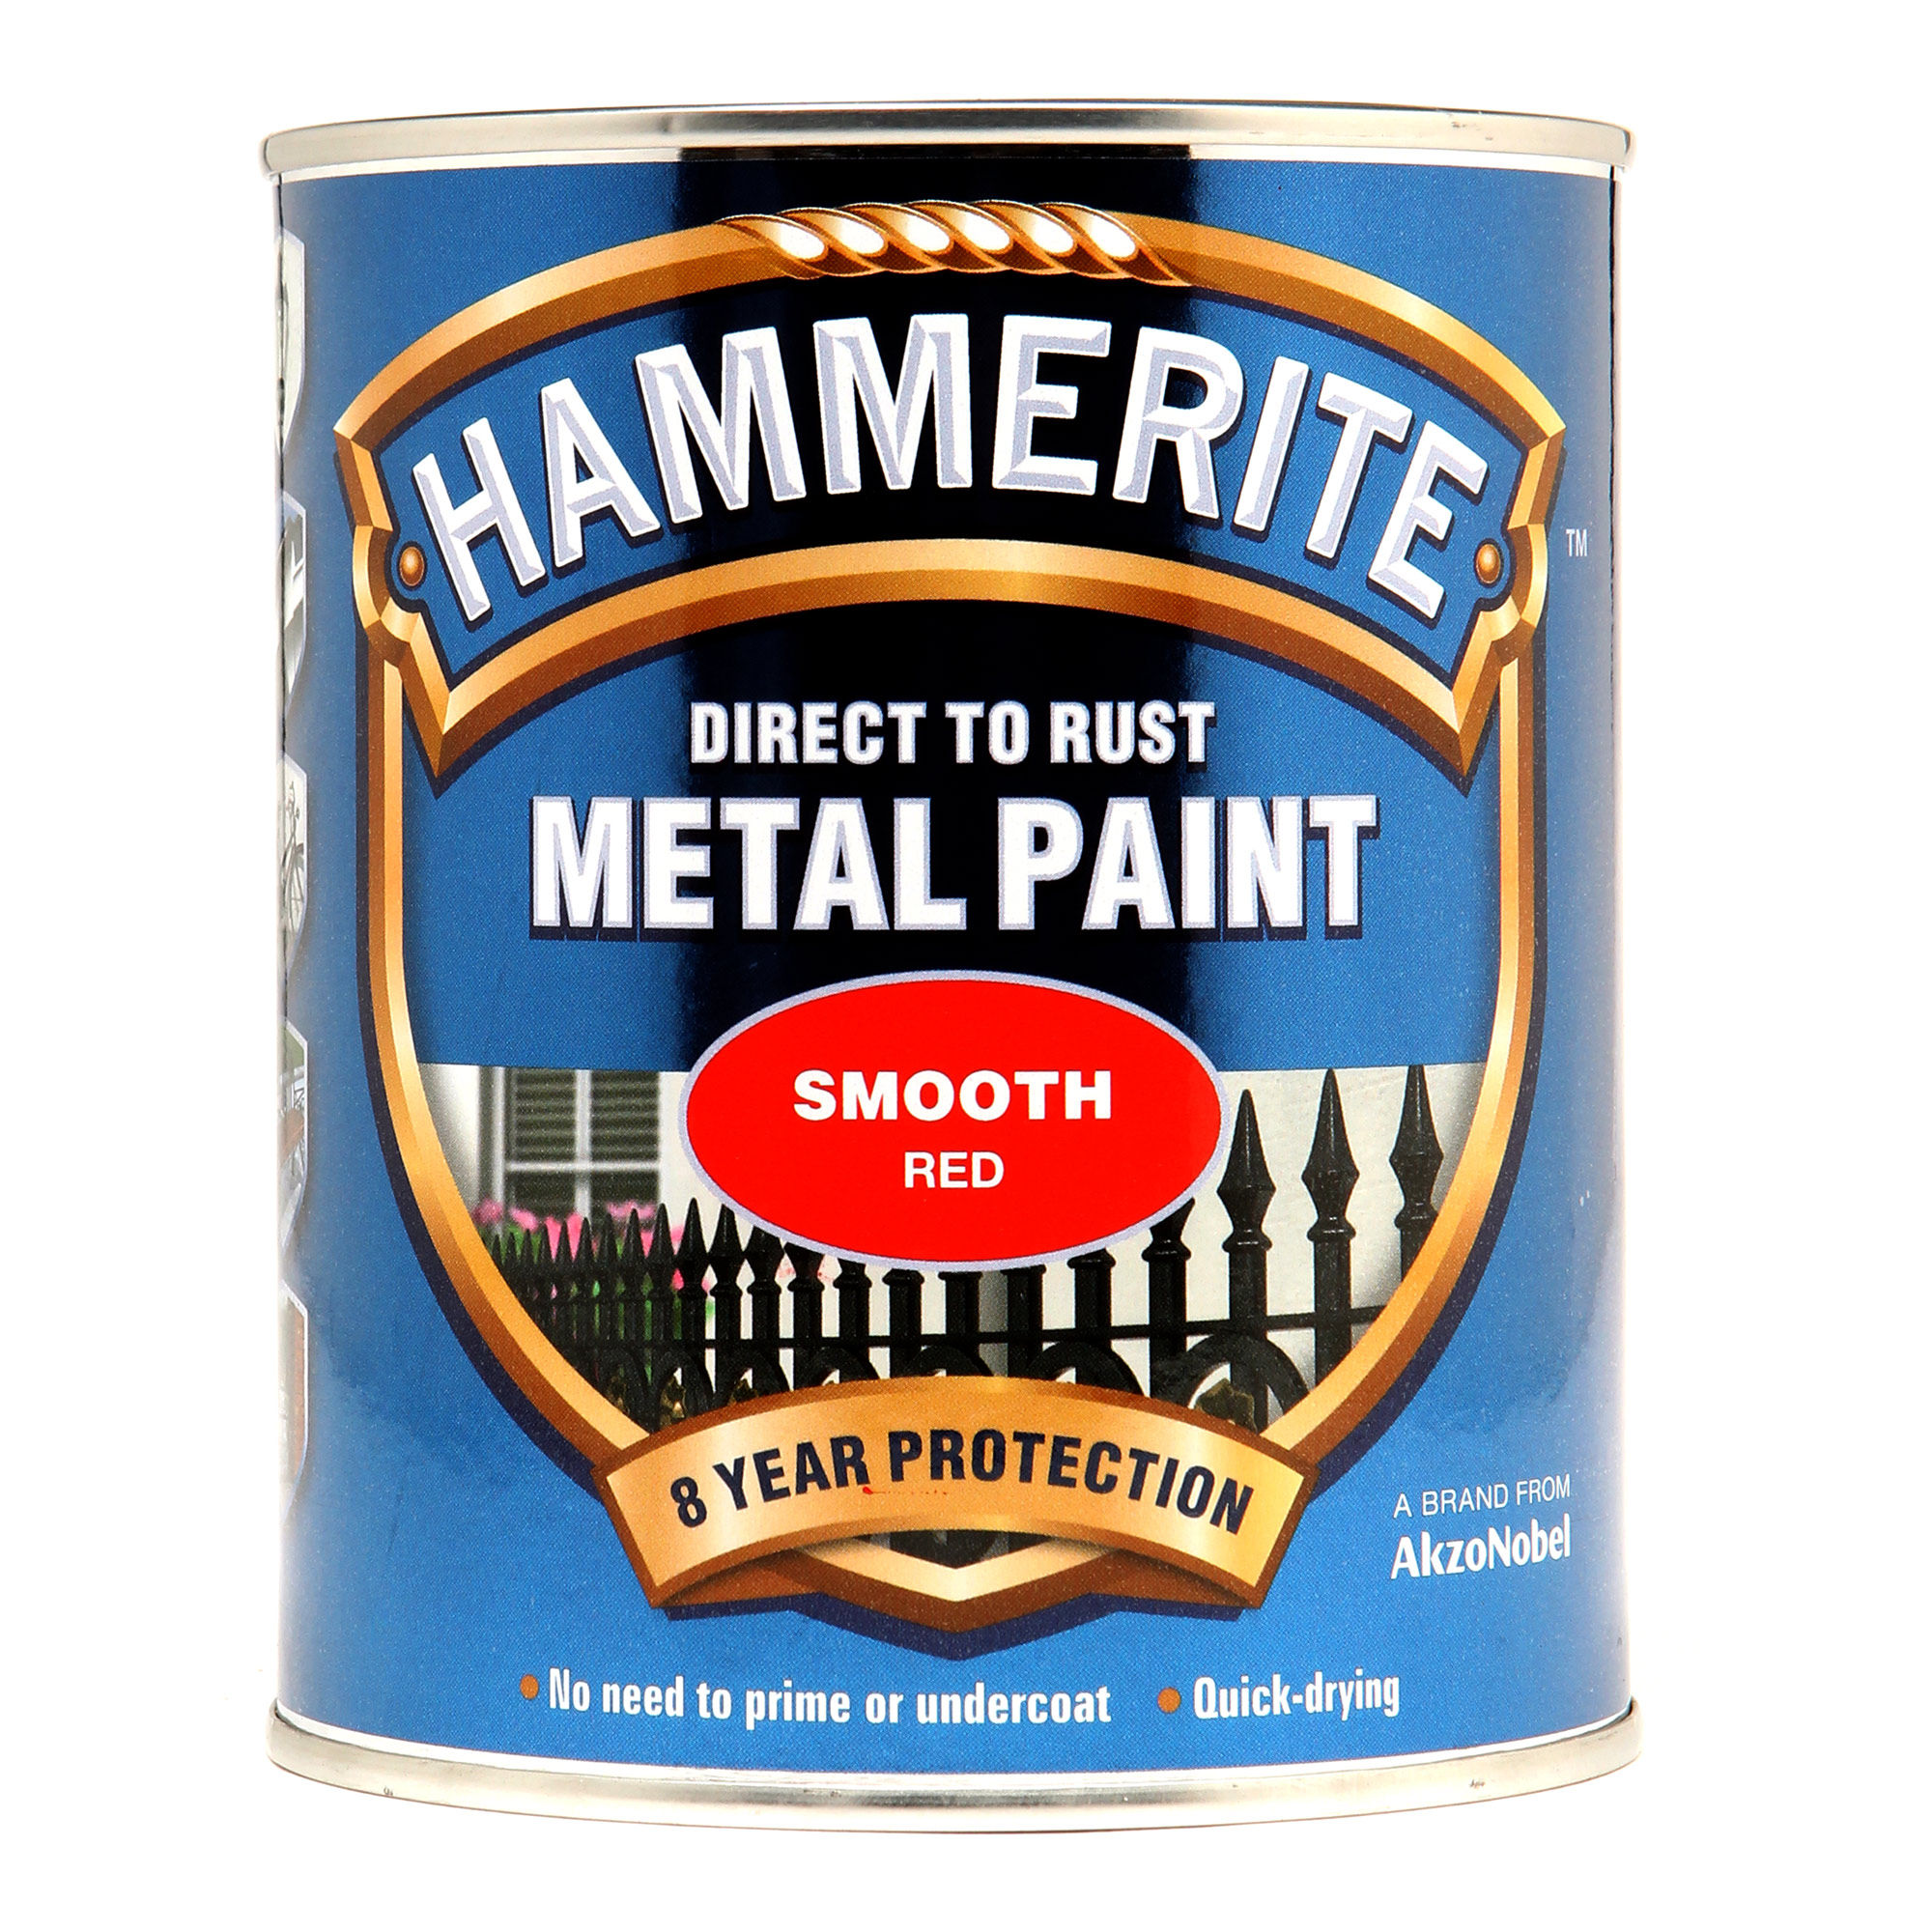 Hammerite Direct to Rust Metal Paint Smooth Finish Red